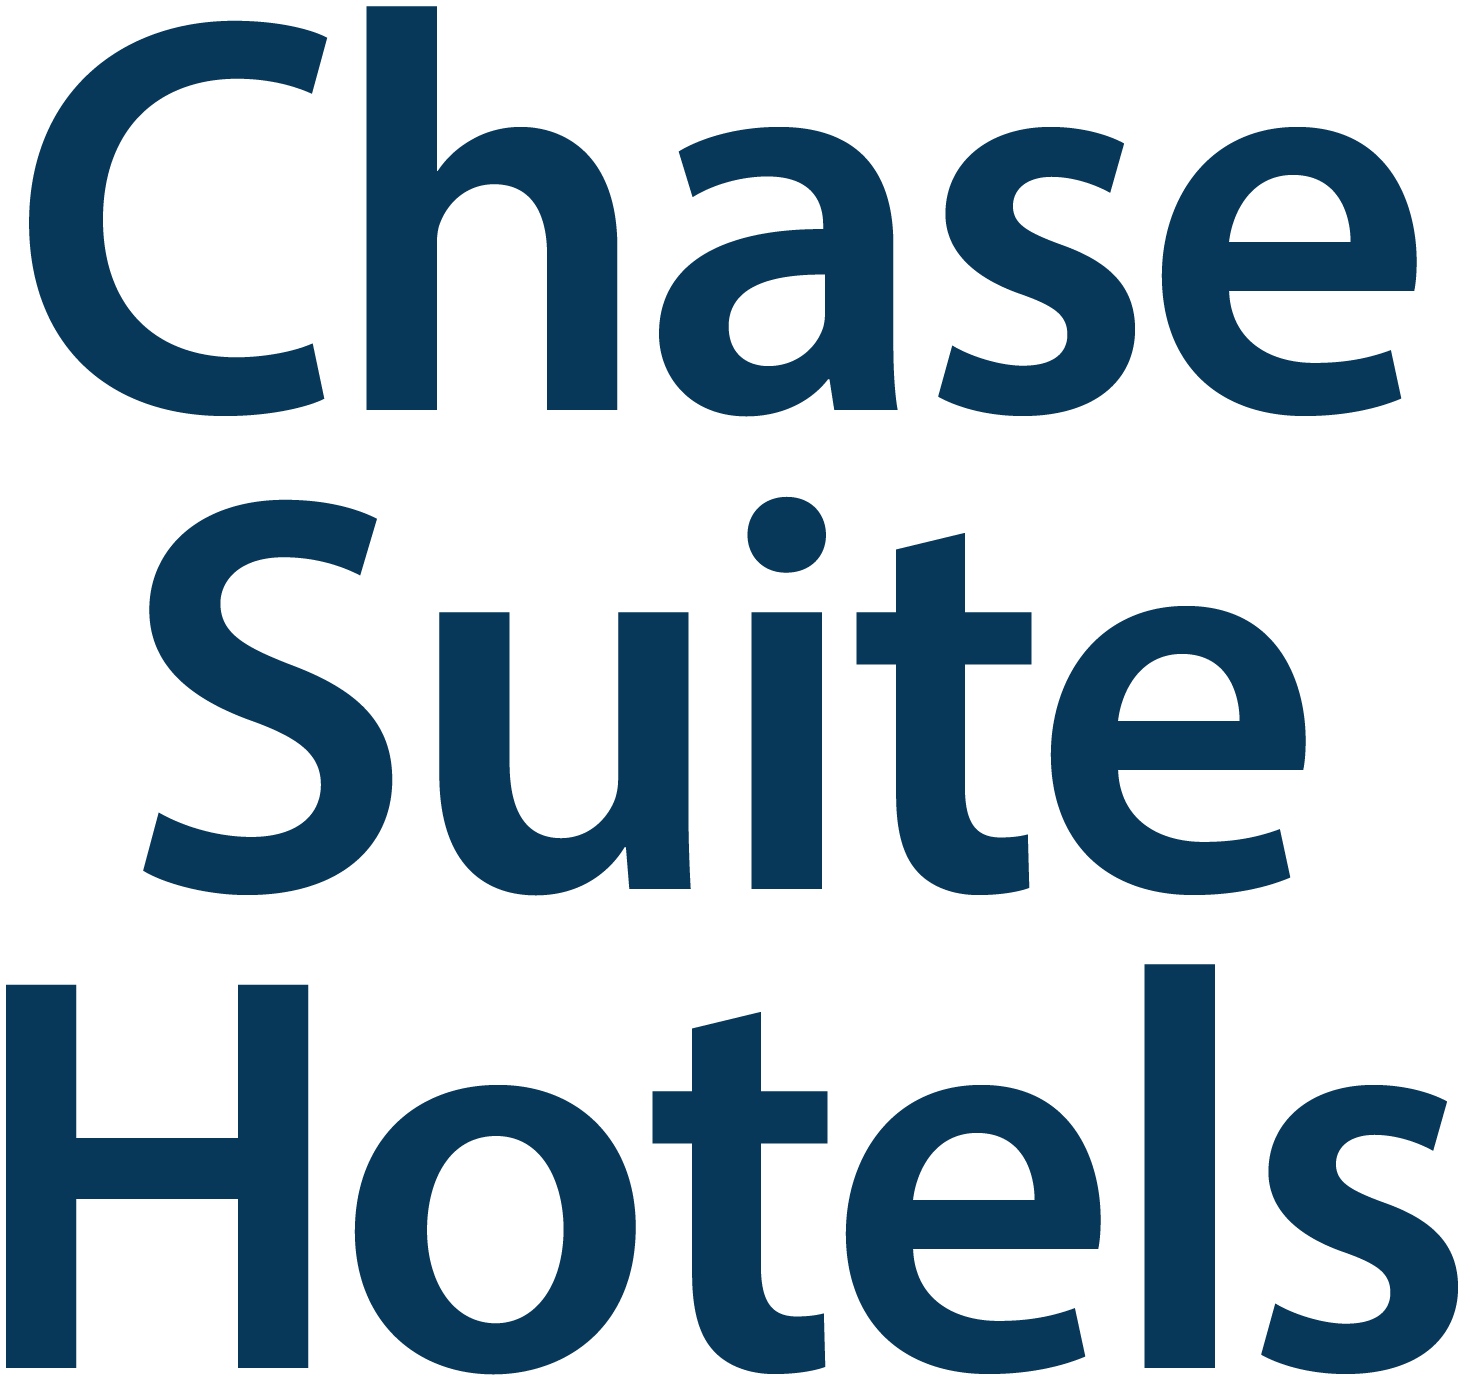 Chase Suites